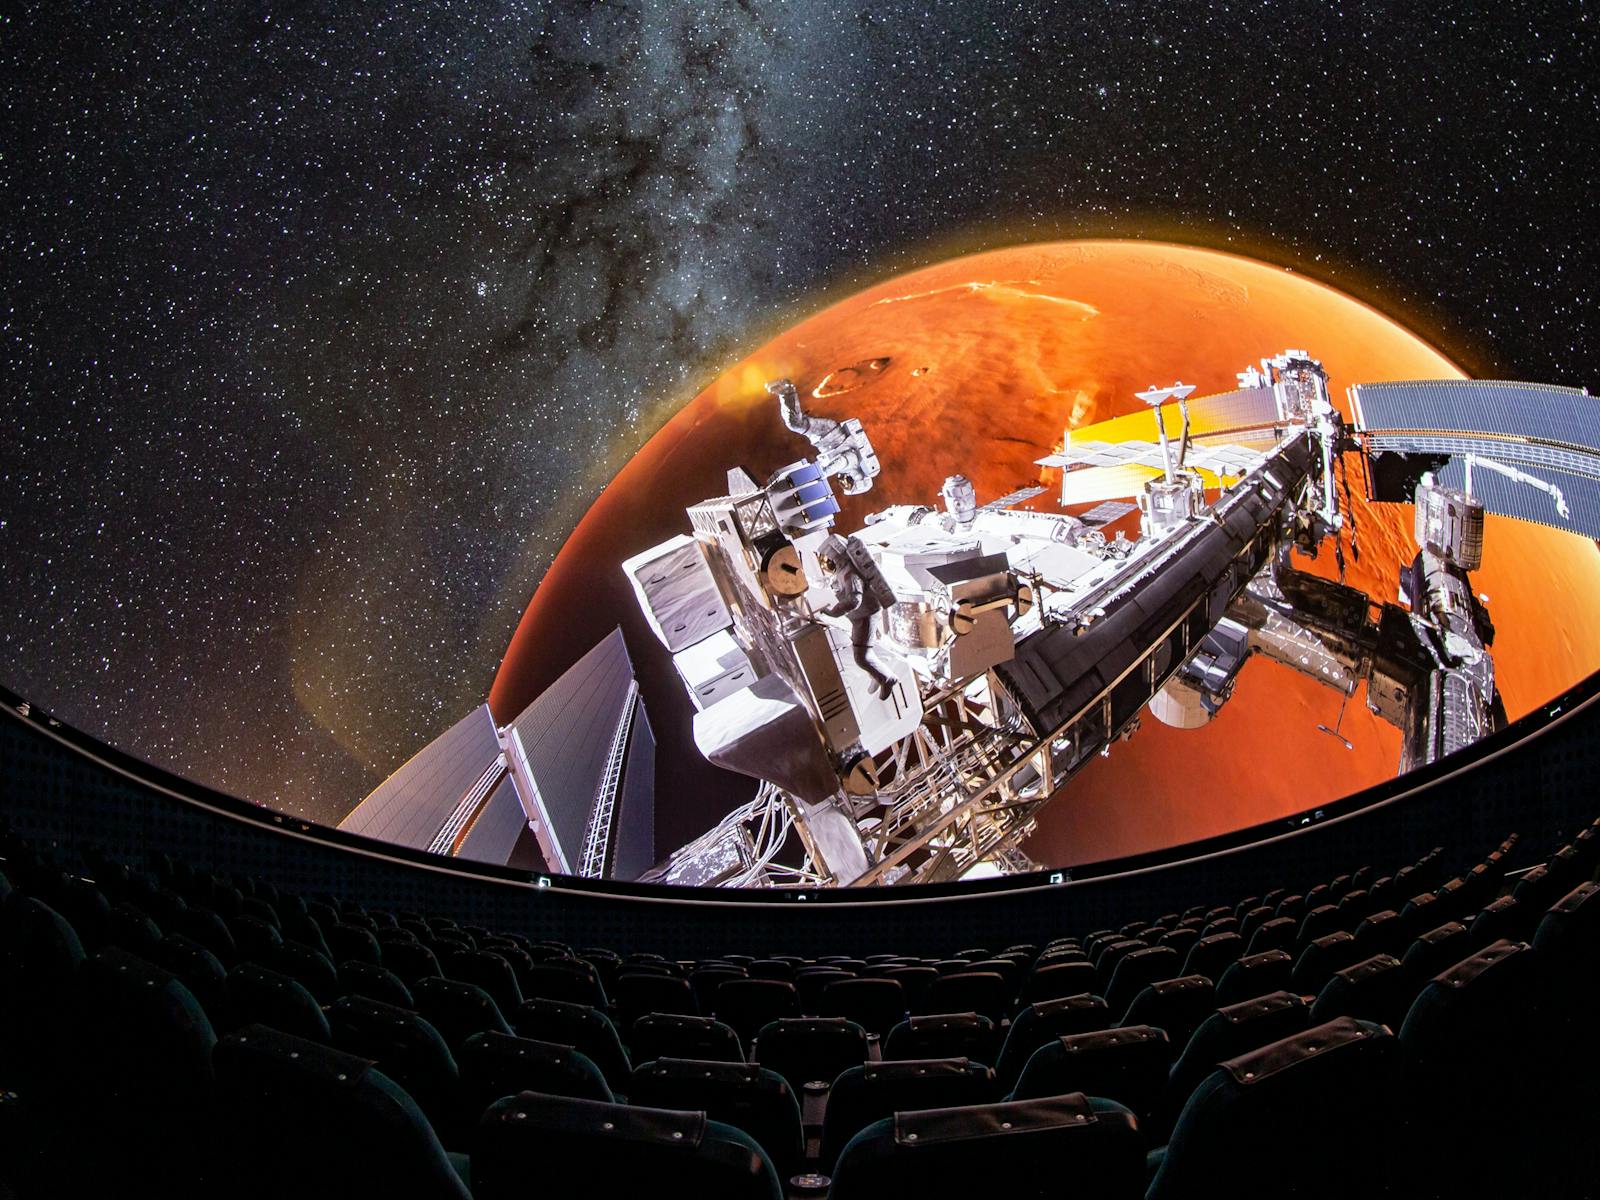 Image from the Dark Side of the Moon planetarium show, depicting a space station above Mars.